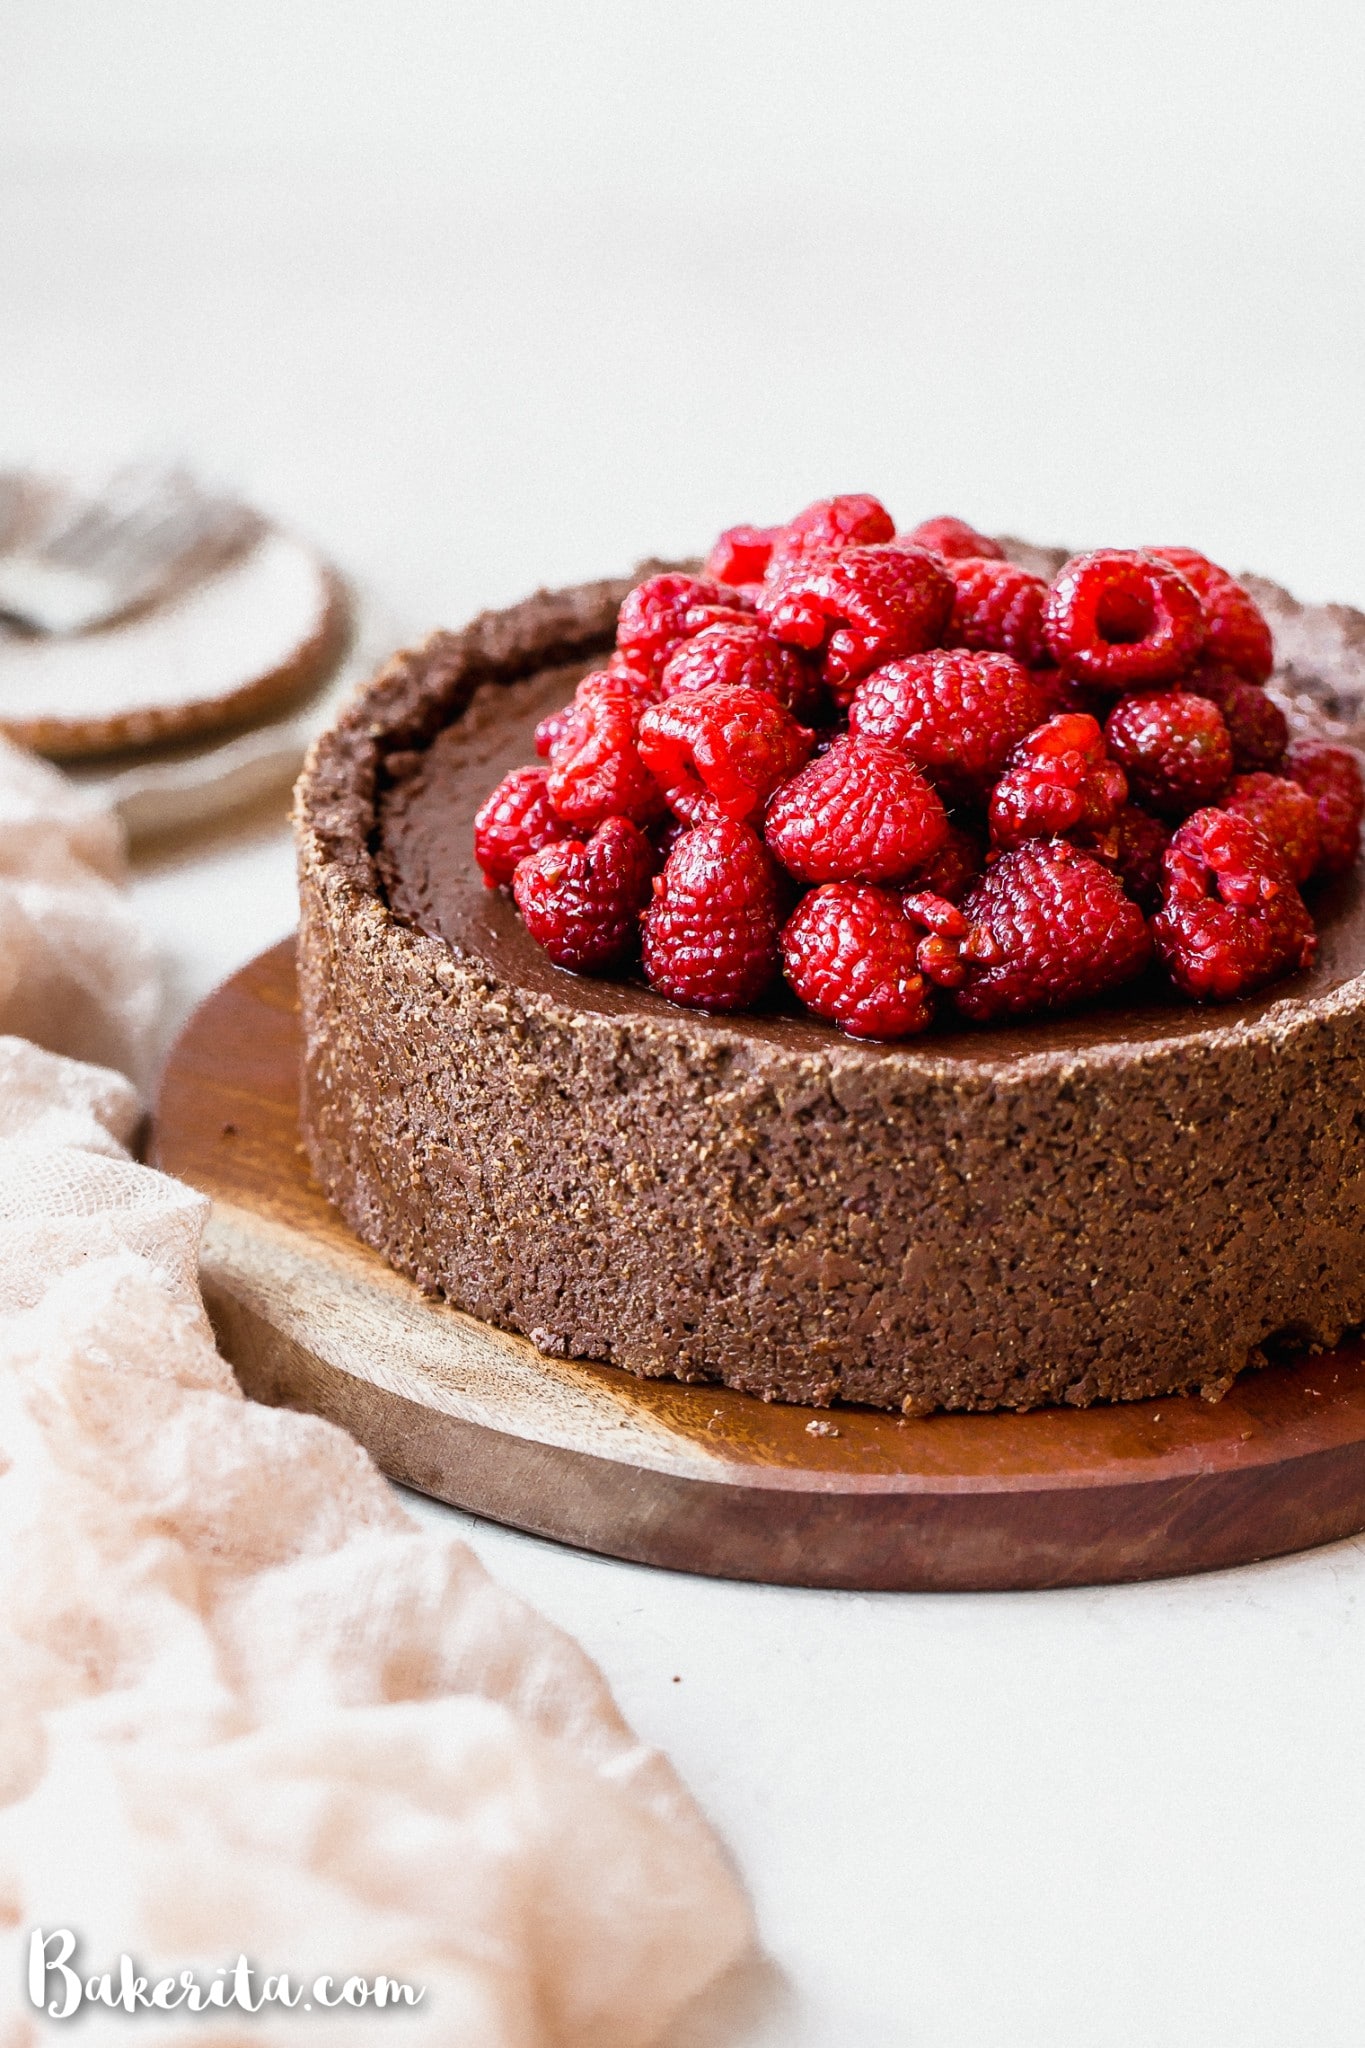 This Baked Vegan Chocolate Cheesecake will make your mouth water! It's super creamy and delicious, with a rich chocolate flavor and a tasty gluten-free chocolate crust.